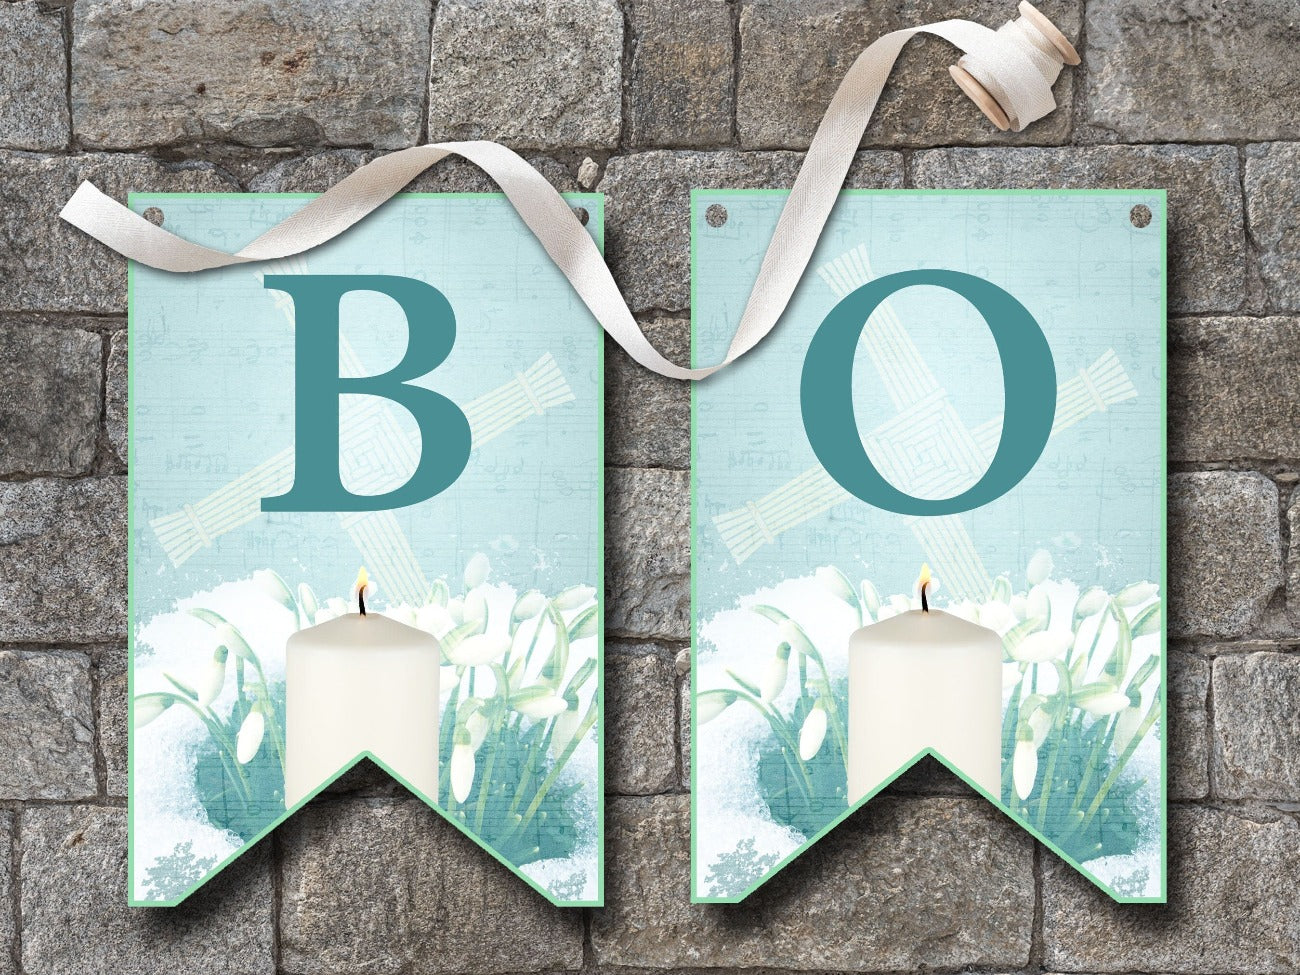 IMBOLC BANNER Bunting, Flags B and O, flags are pale blue with dark blue letters, each flag is imbellished with a Brigids Cross, snowdrops peeking through a layer of snow and a lit white candle - Morgana Magick Spell